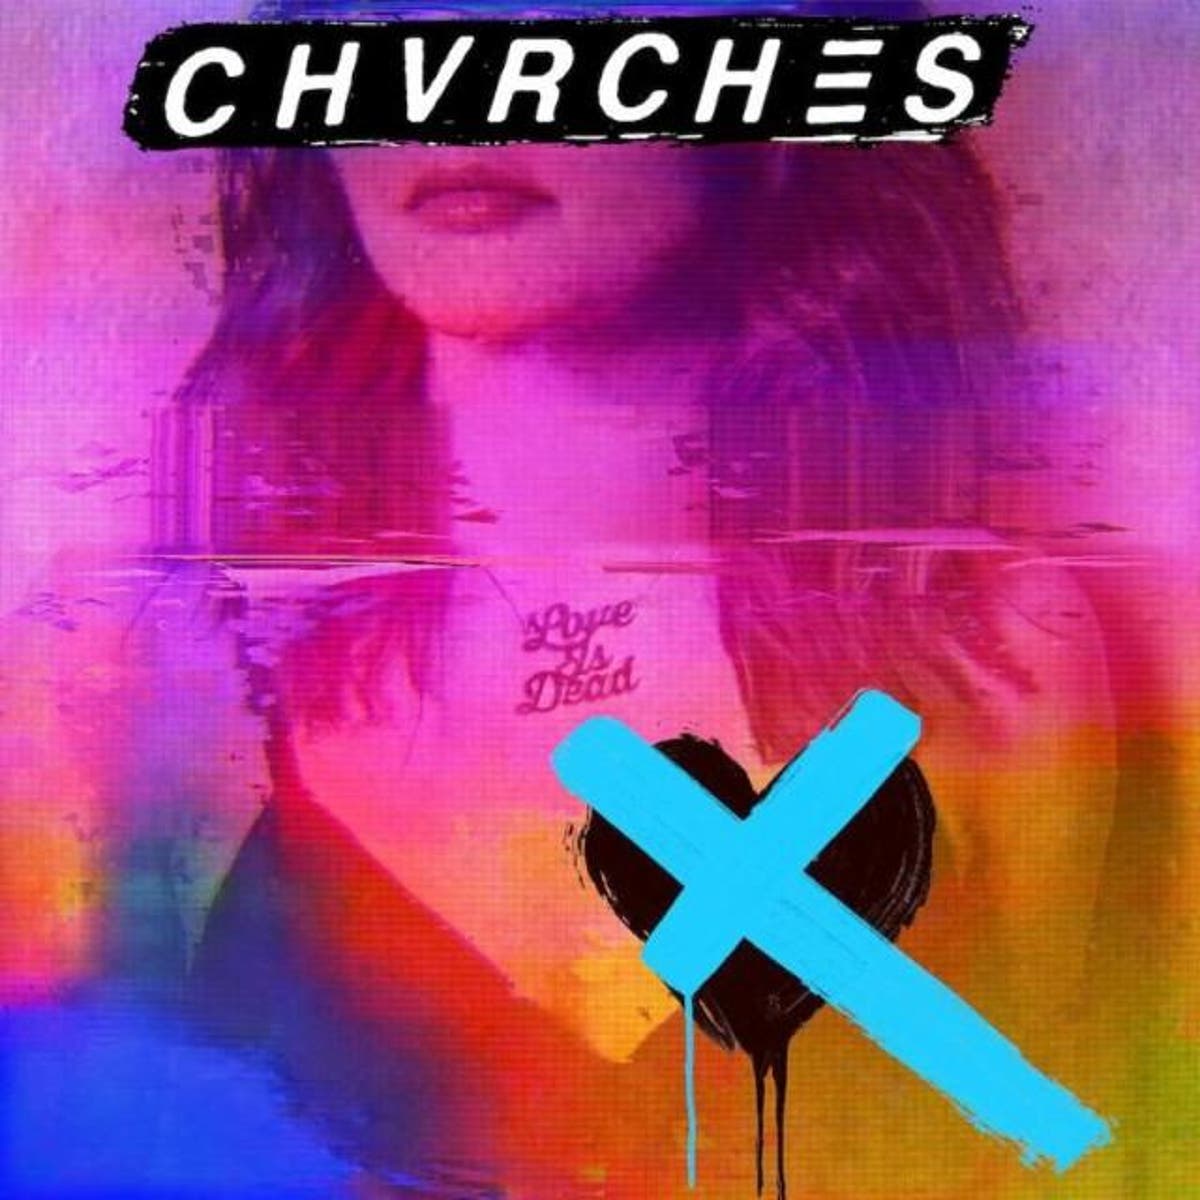 Album reviews: Chvrches 'Love Is Dead', Snow Patrol 'Wildness' and more